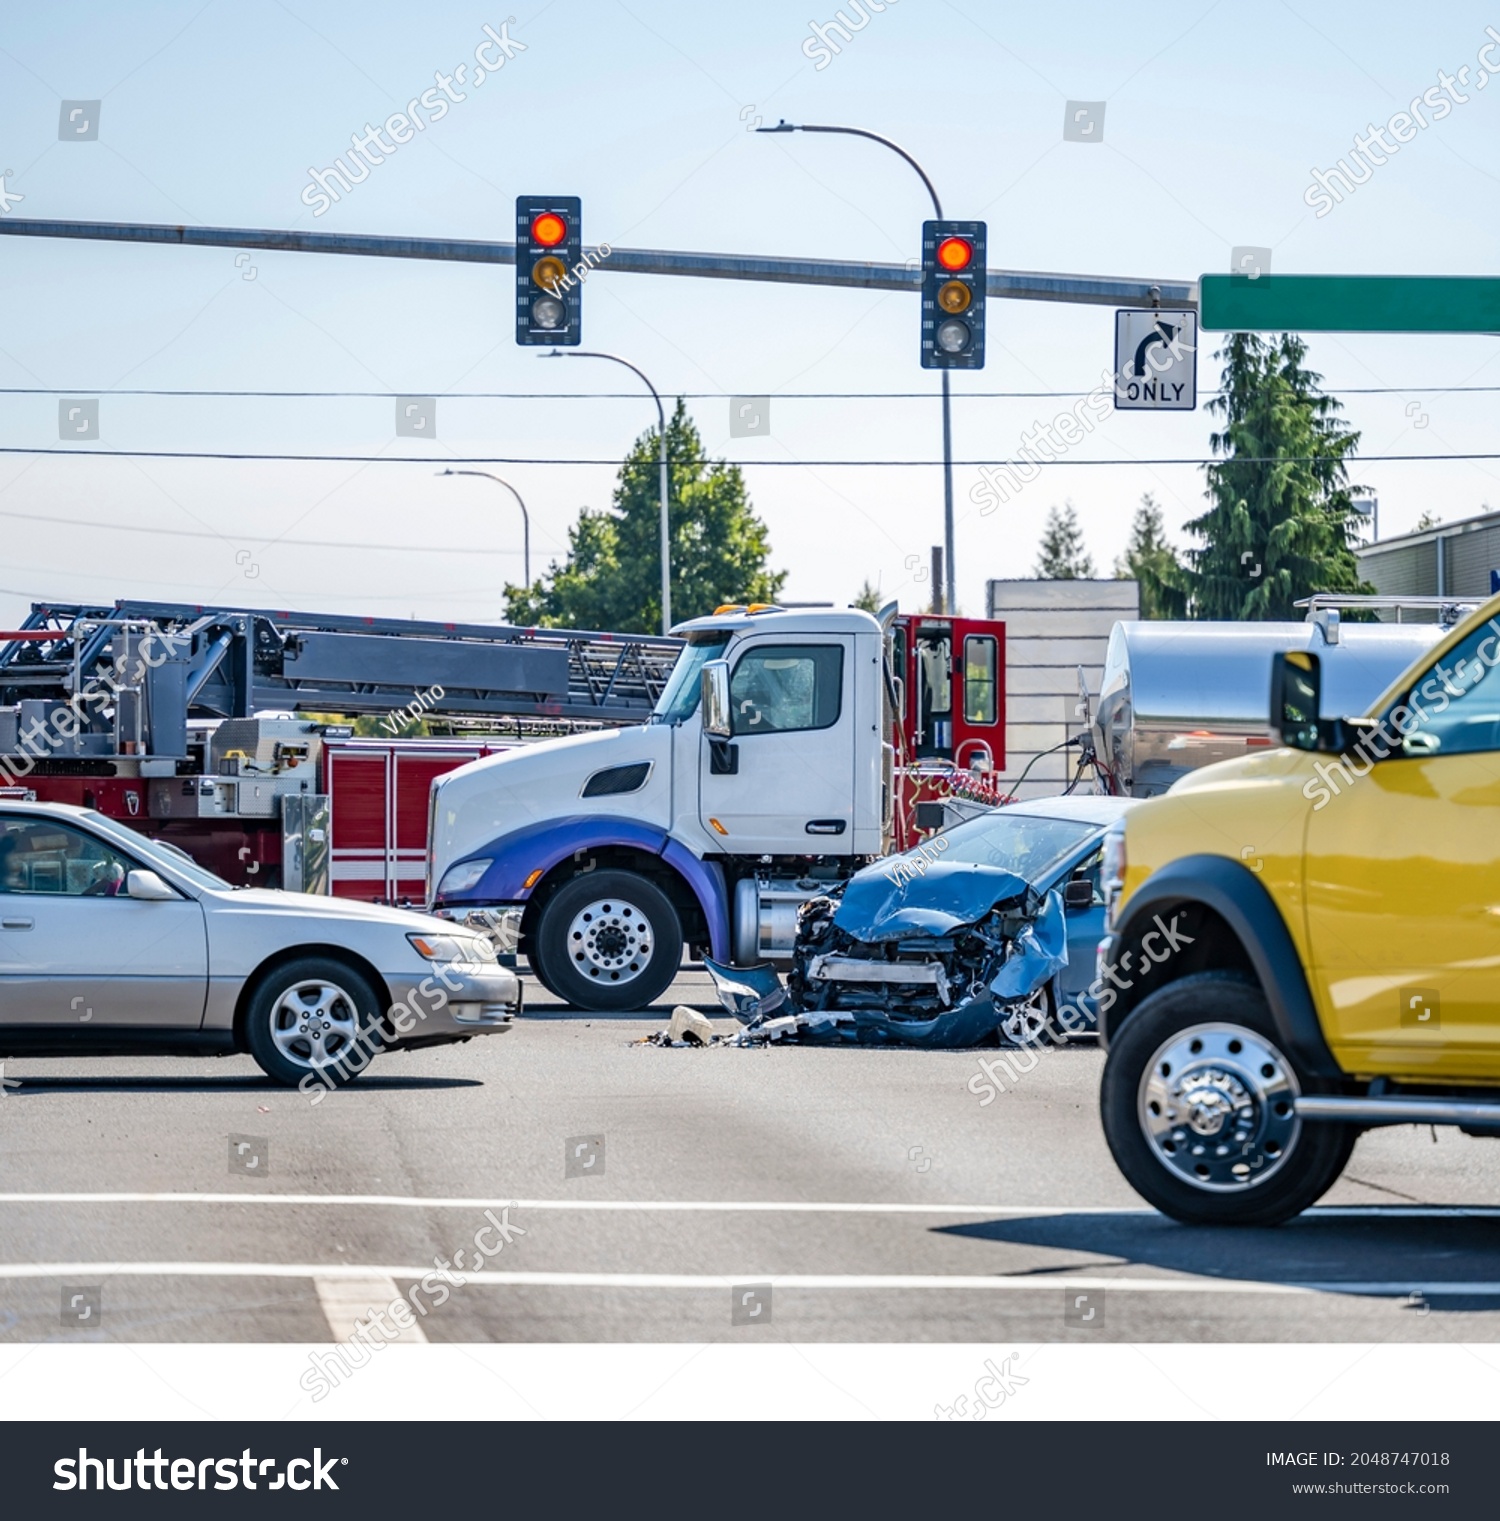 Damaged cars after a car accident crash involving a big rig semi truck with semi trailer at a city street crossroad intersection with traffic light and rescue services to help the injured #2048747018